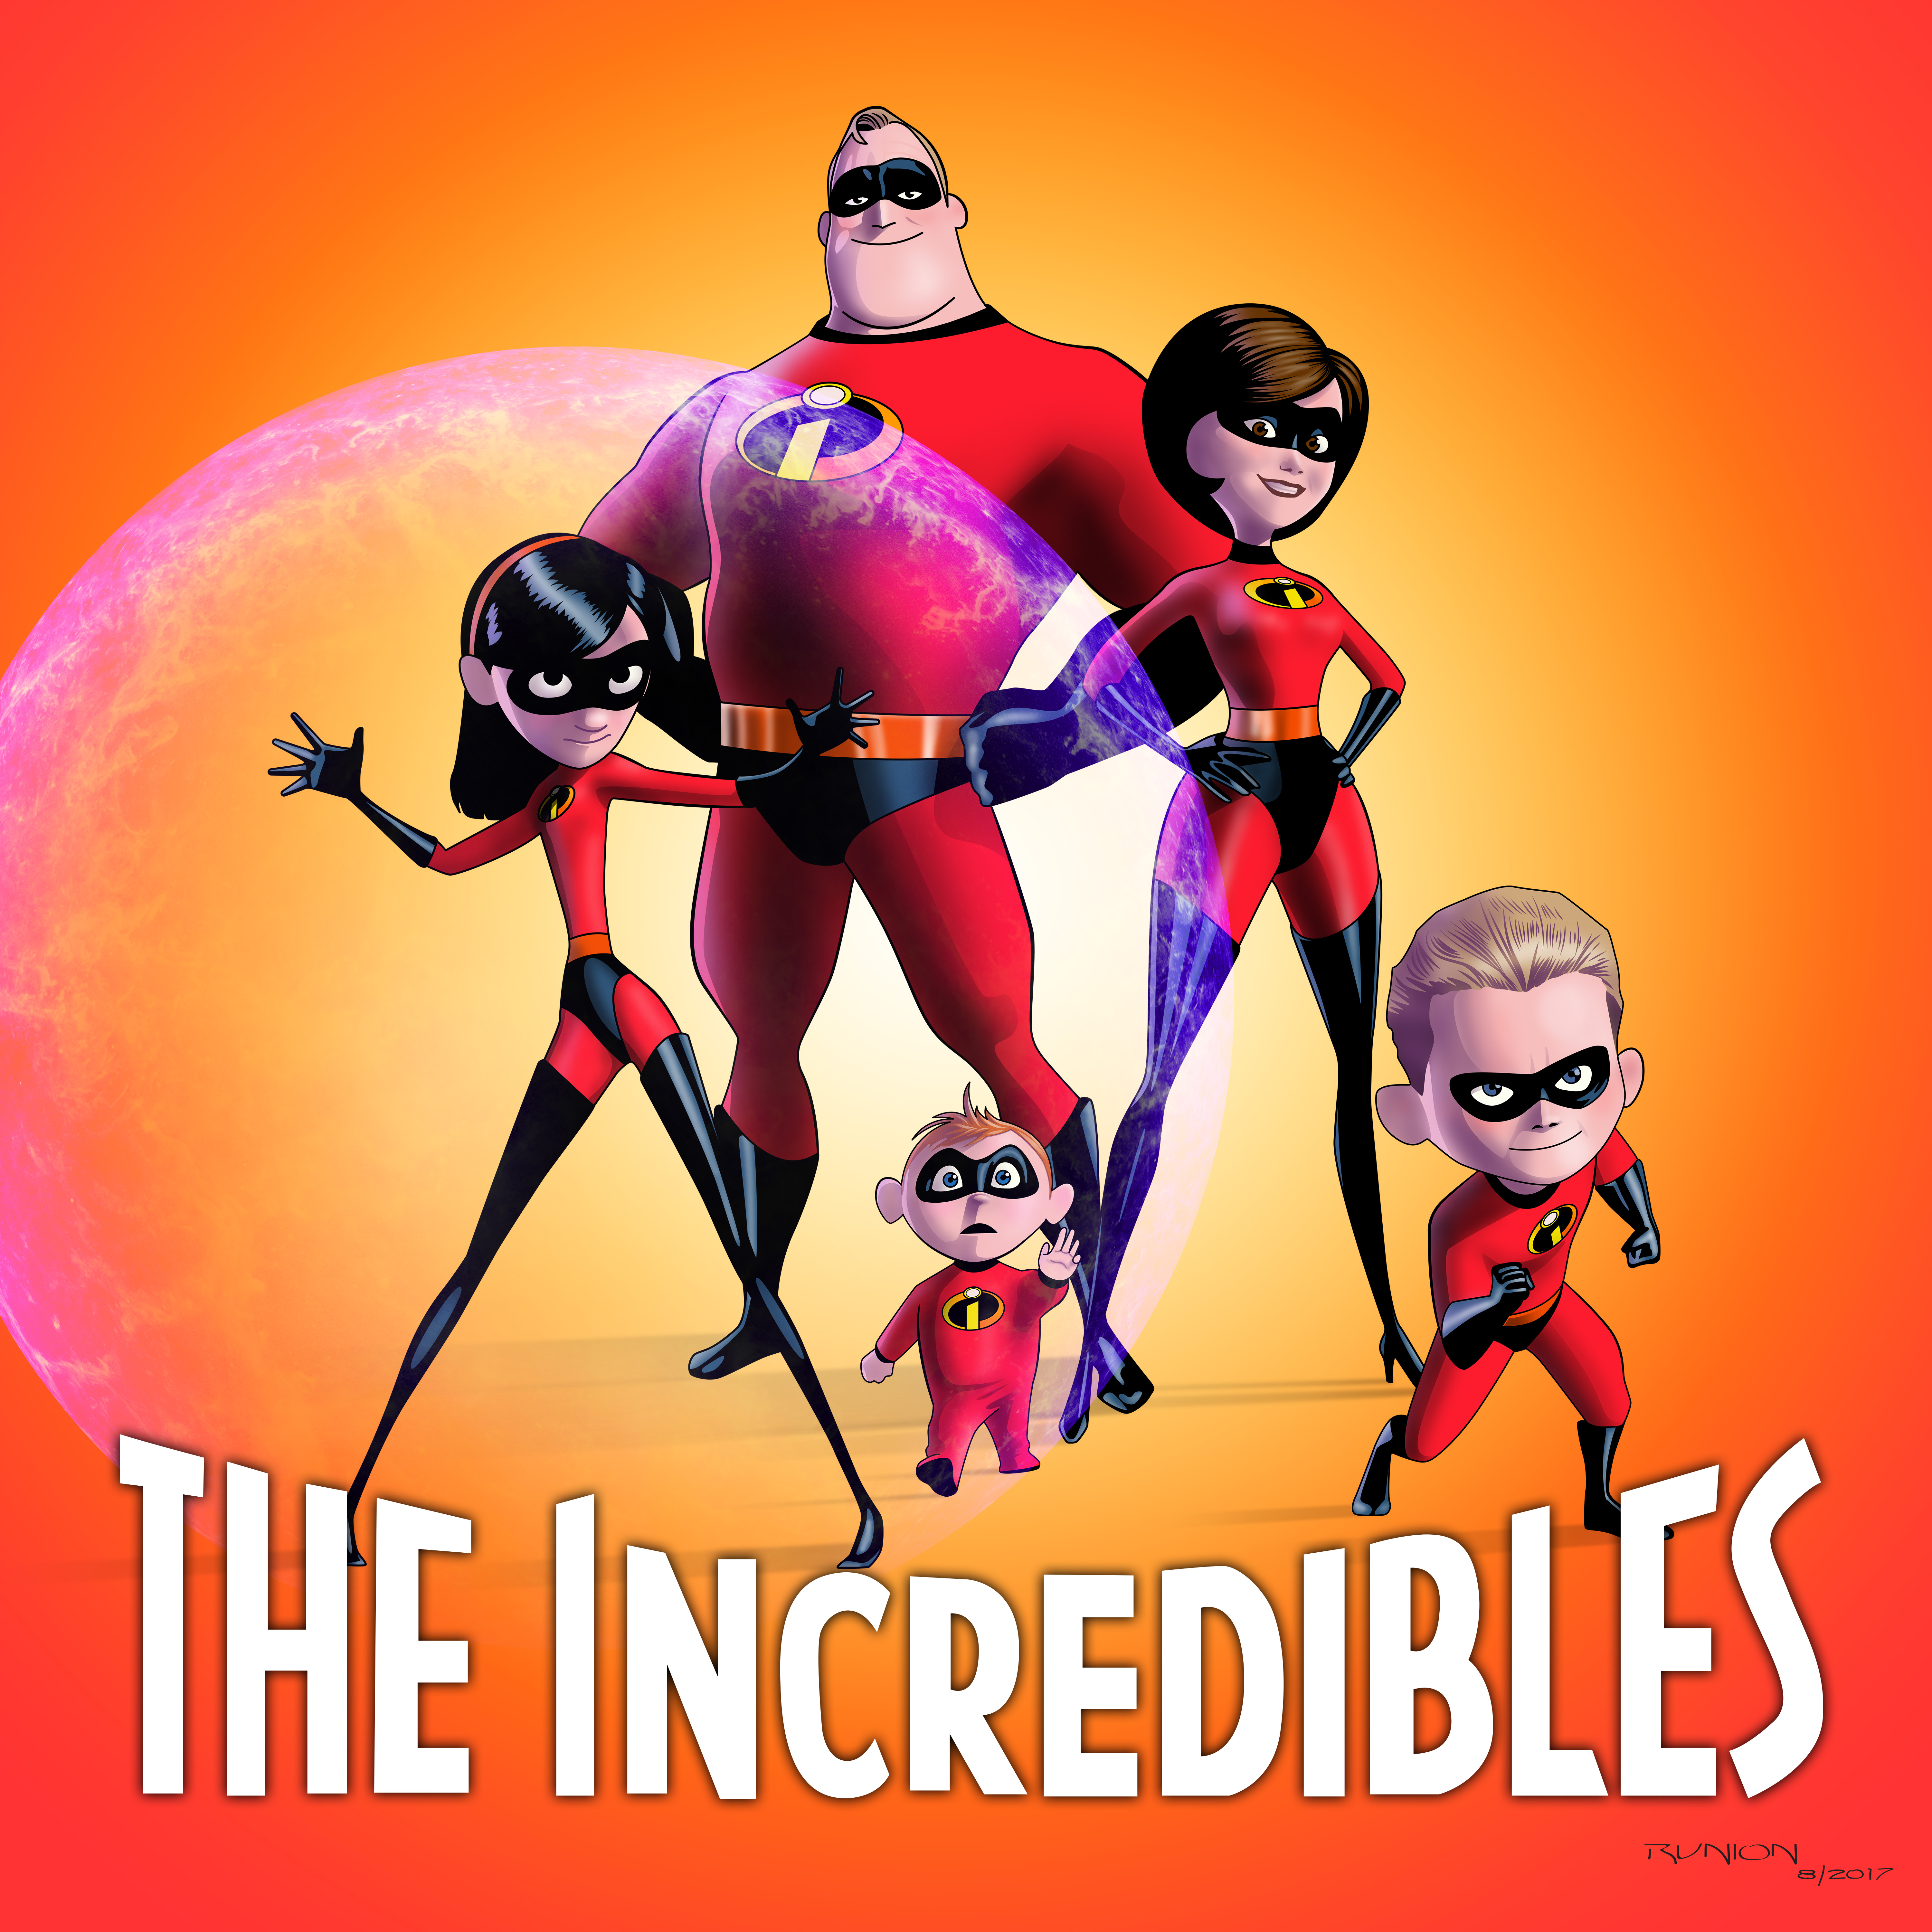 the_incredibles_by_arunion-dbjz3zv